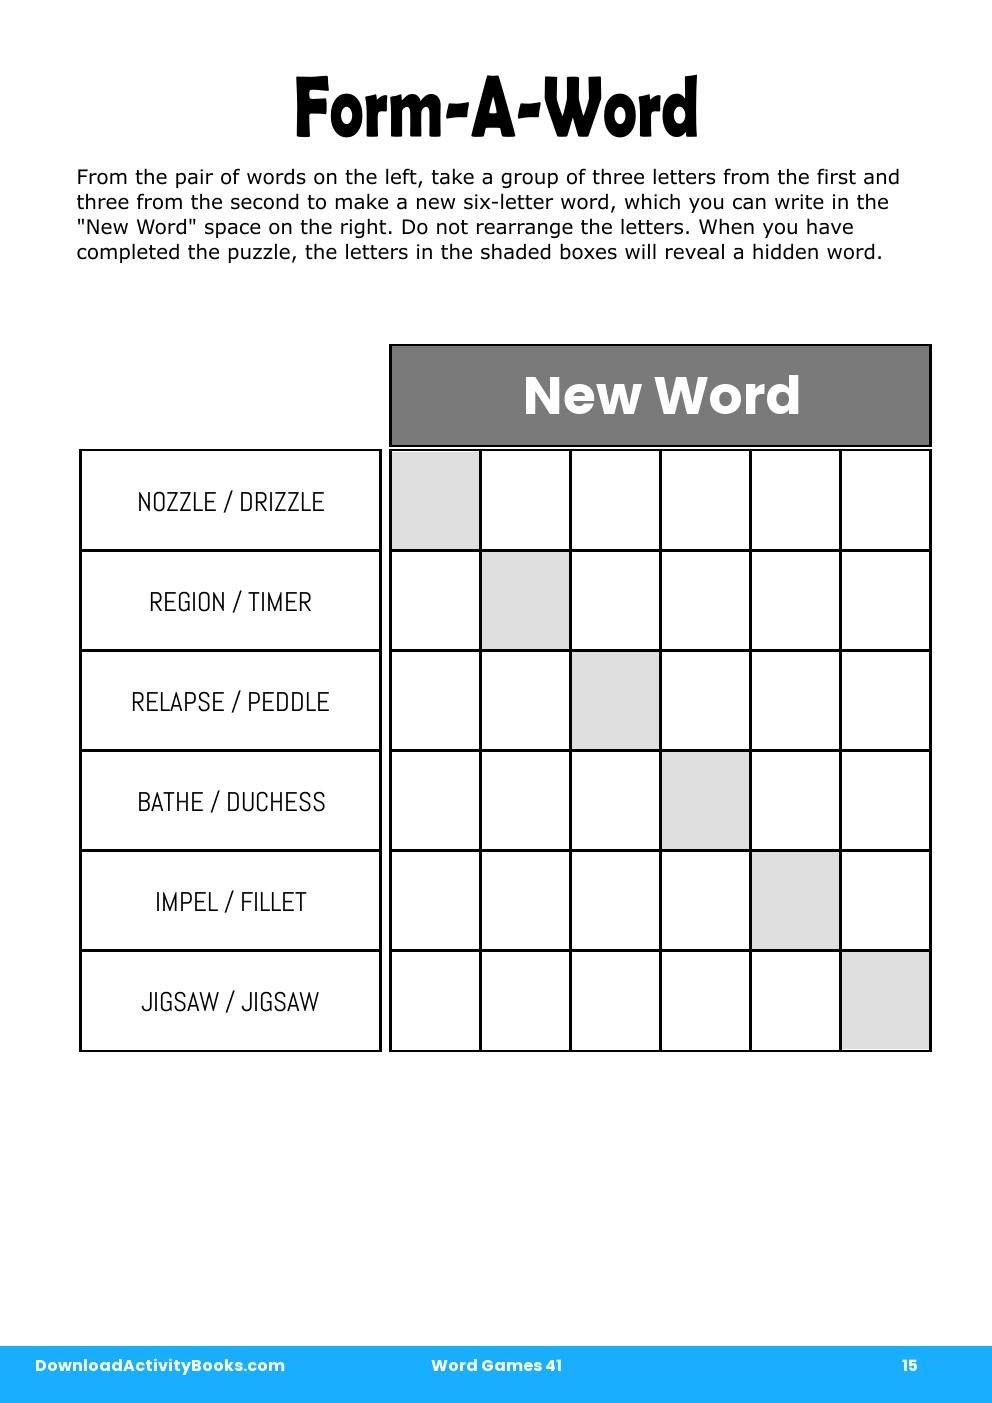 Form-A-Word in Word Games 41